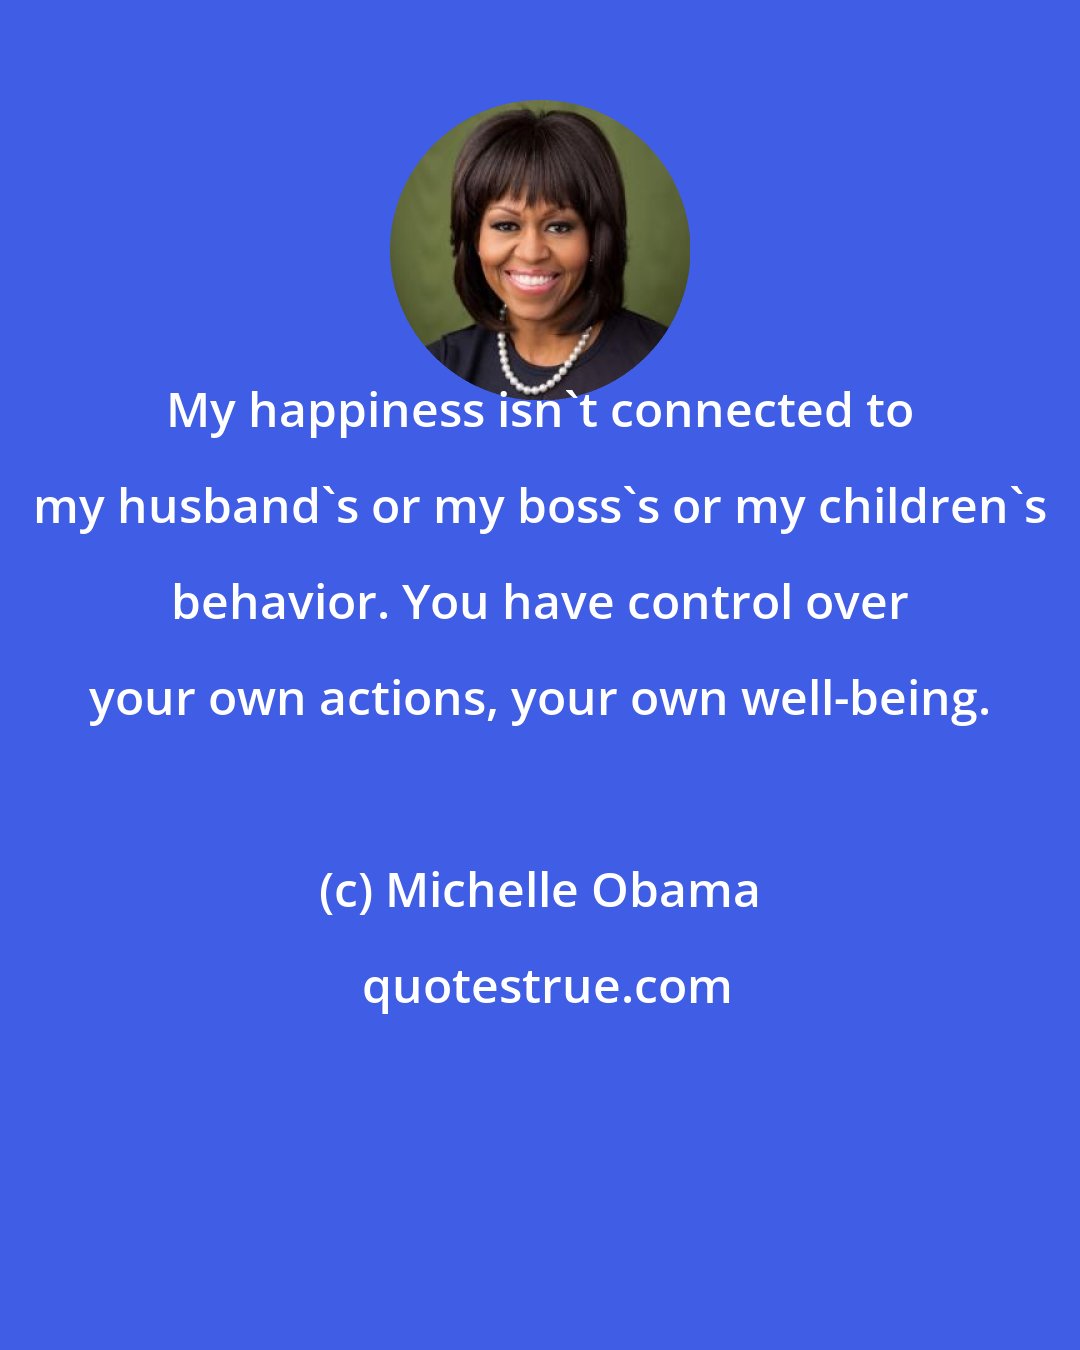 Michelle Obama: My happiness isn't connected to my husband's or my boss's or my children's behavior. You have control over your own actions, your own well-being.